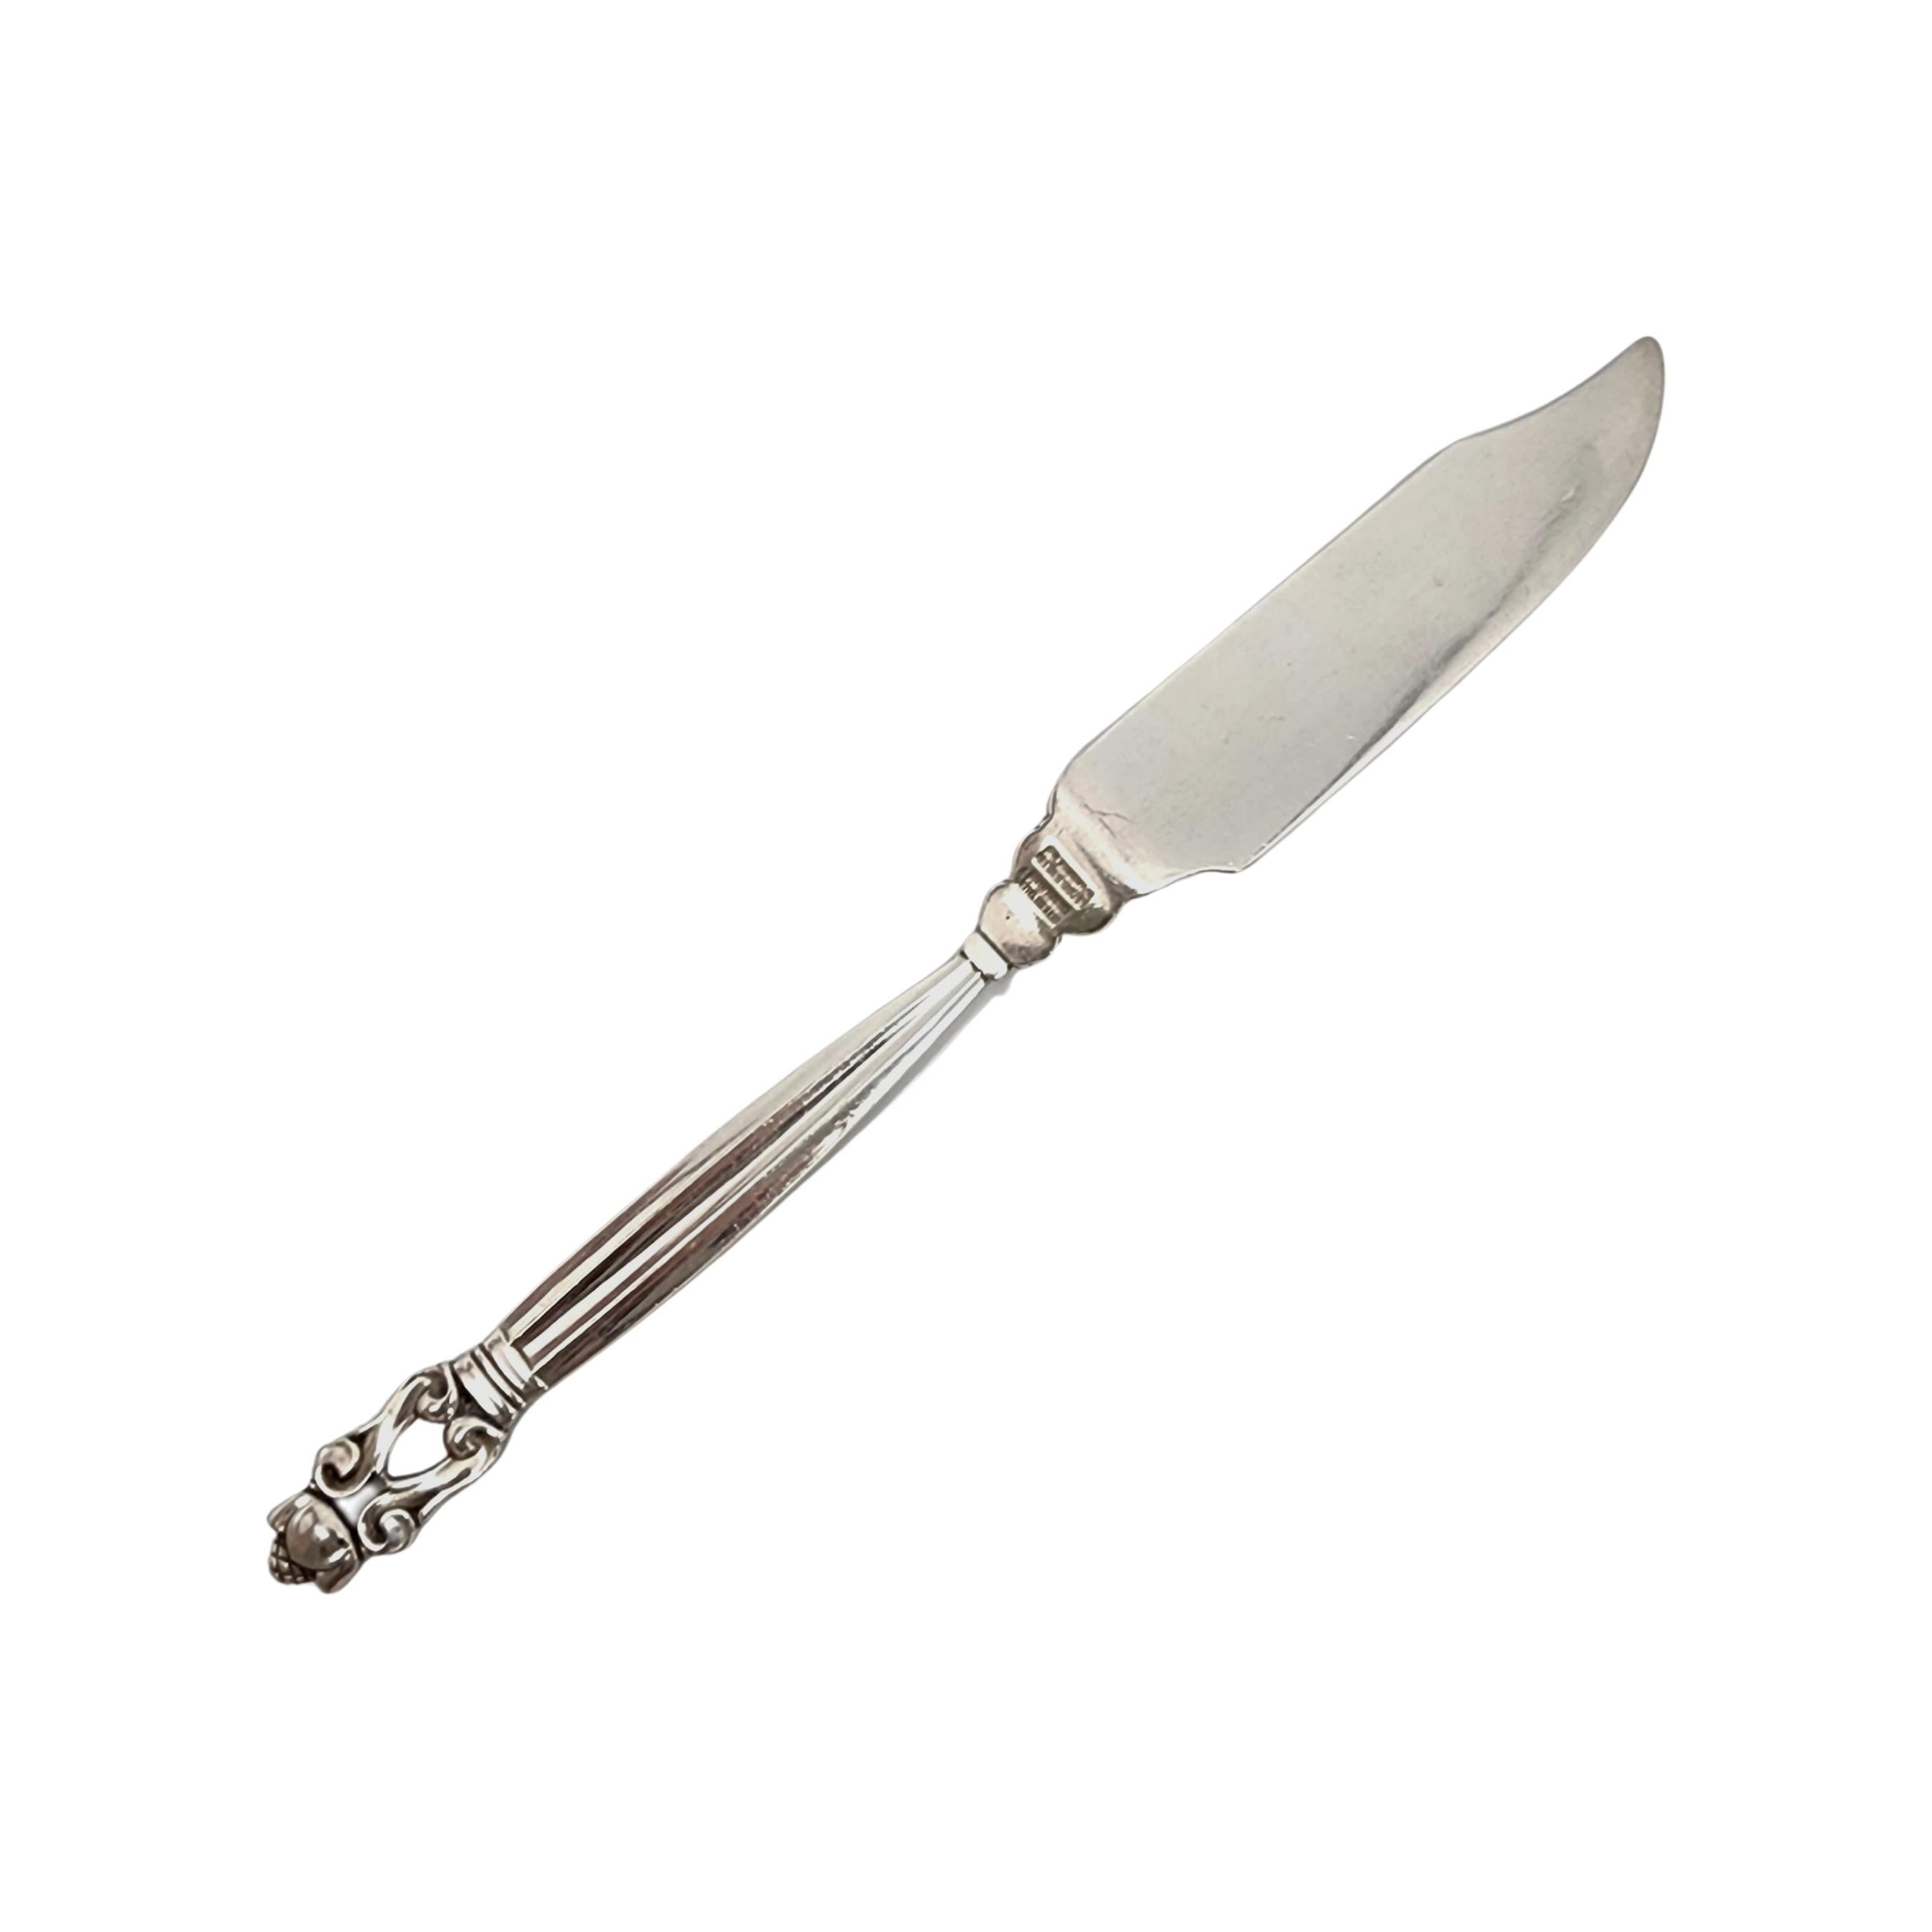 Sterling silver solid  individual fish knife in the Acorn pattern by Georg Jensen.

The Acorn pattern was introduced in 1915 as a collaboration between Georg Jensen and designer Johan Ronde. The Acorn pattern, which combines Art Nouveau and Art Deco